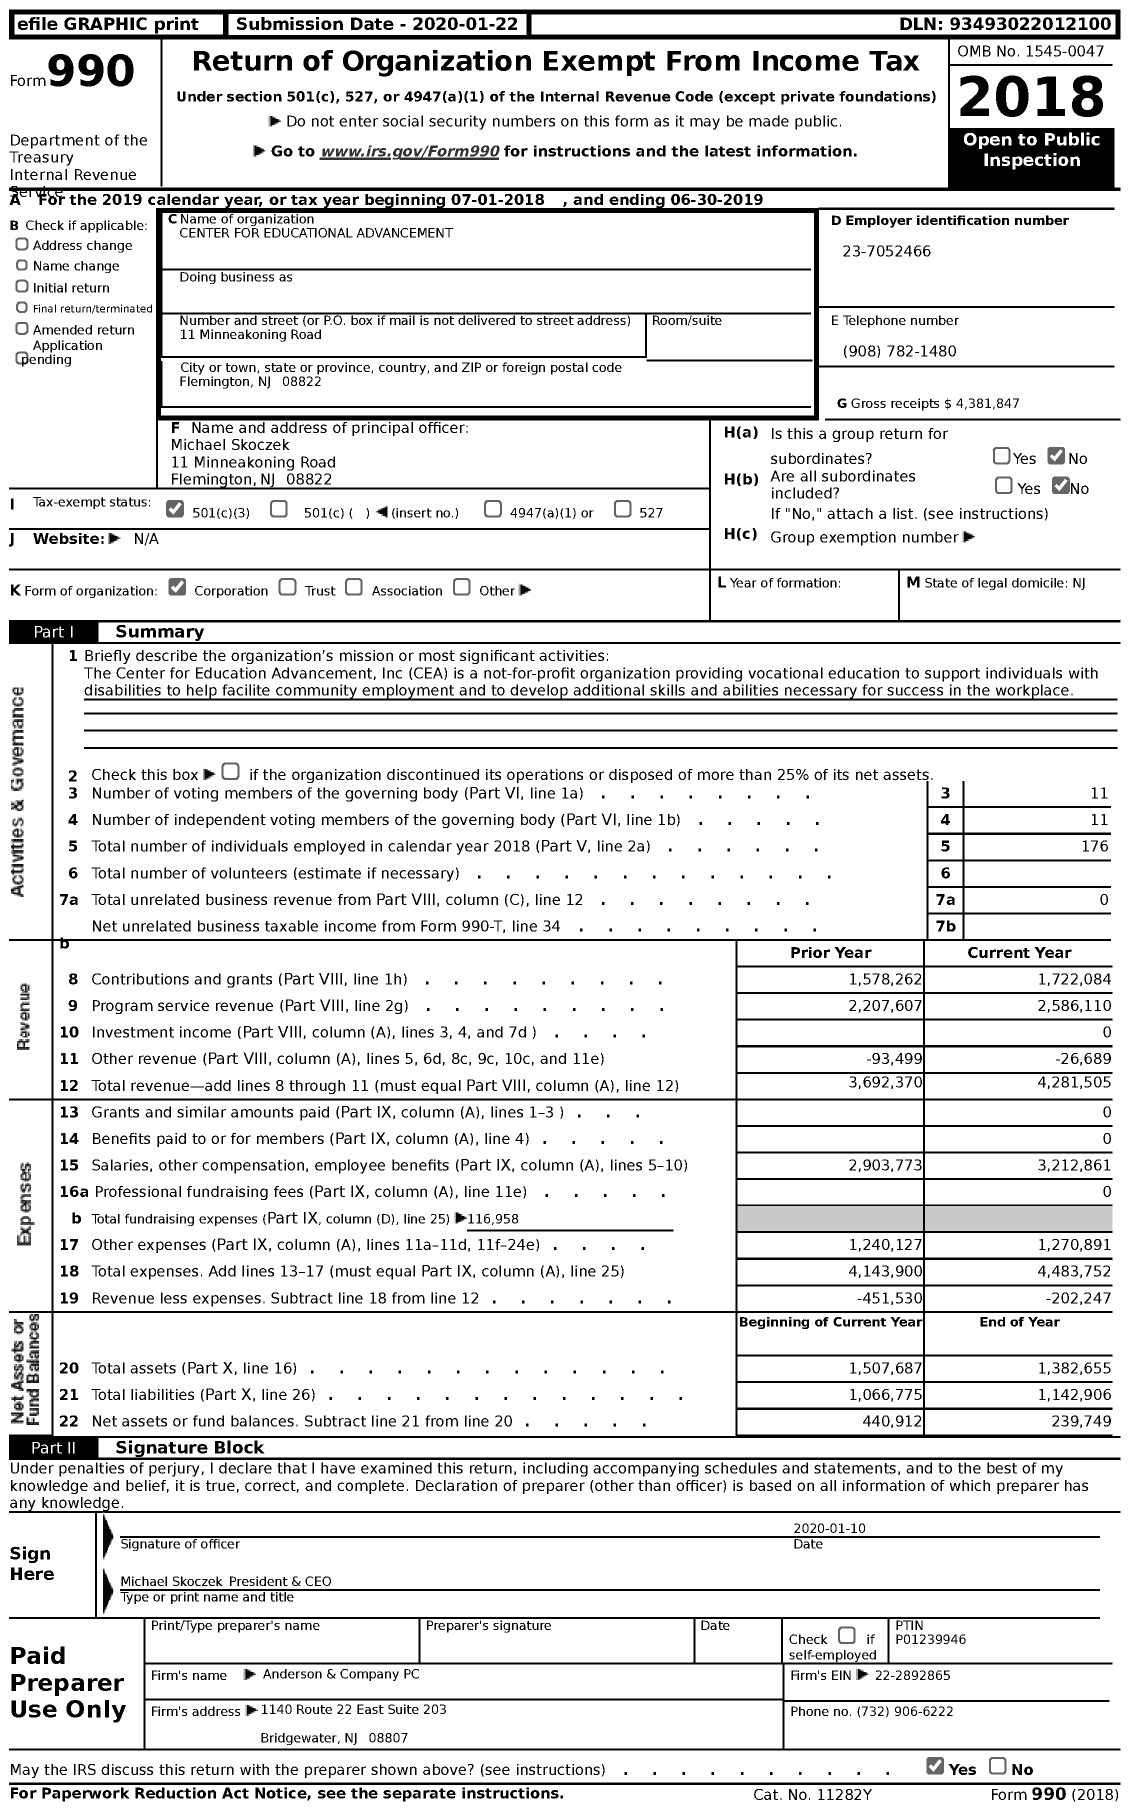 Image of first page of 2018 Form 990 for Center for Educational Advancement (CEA)